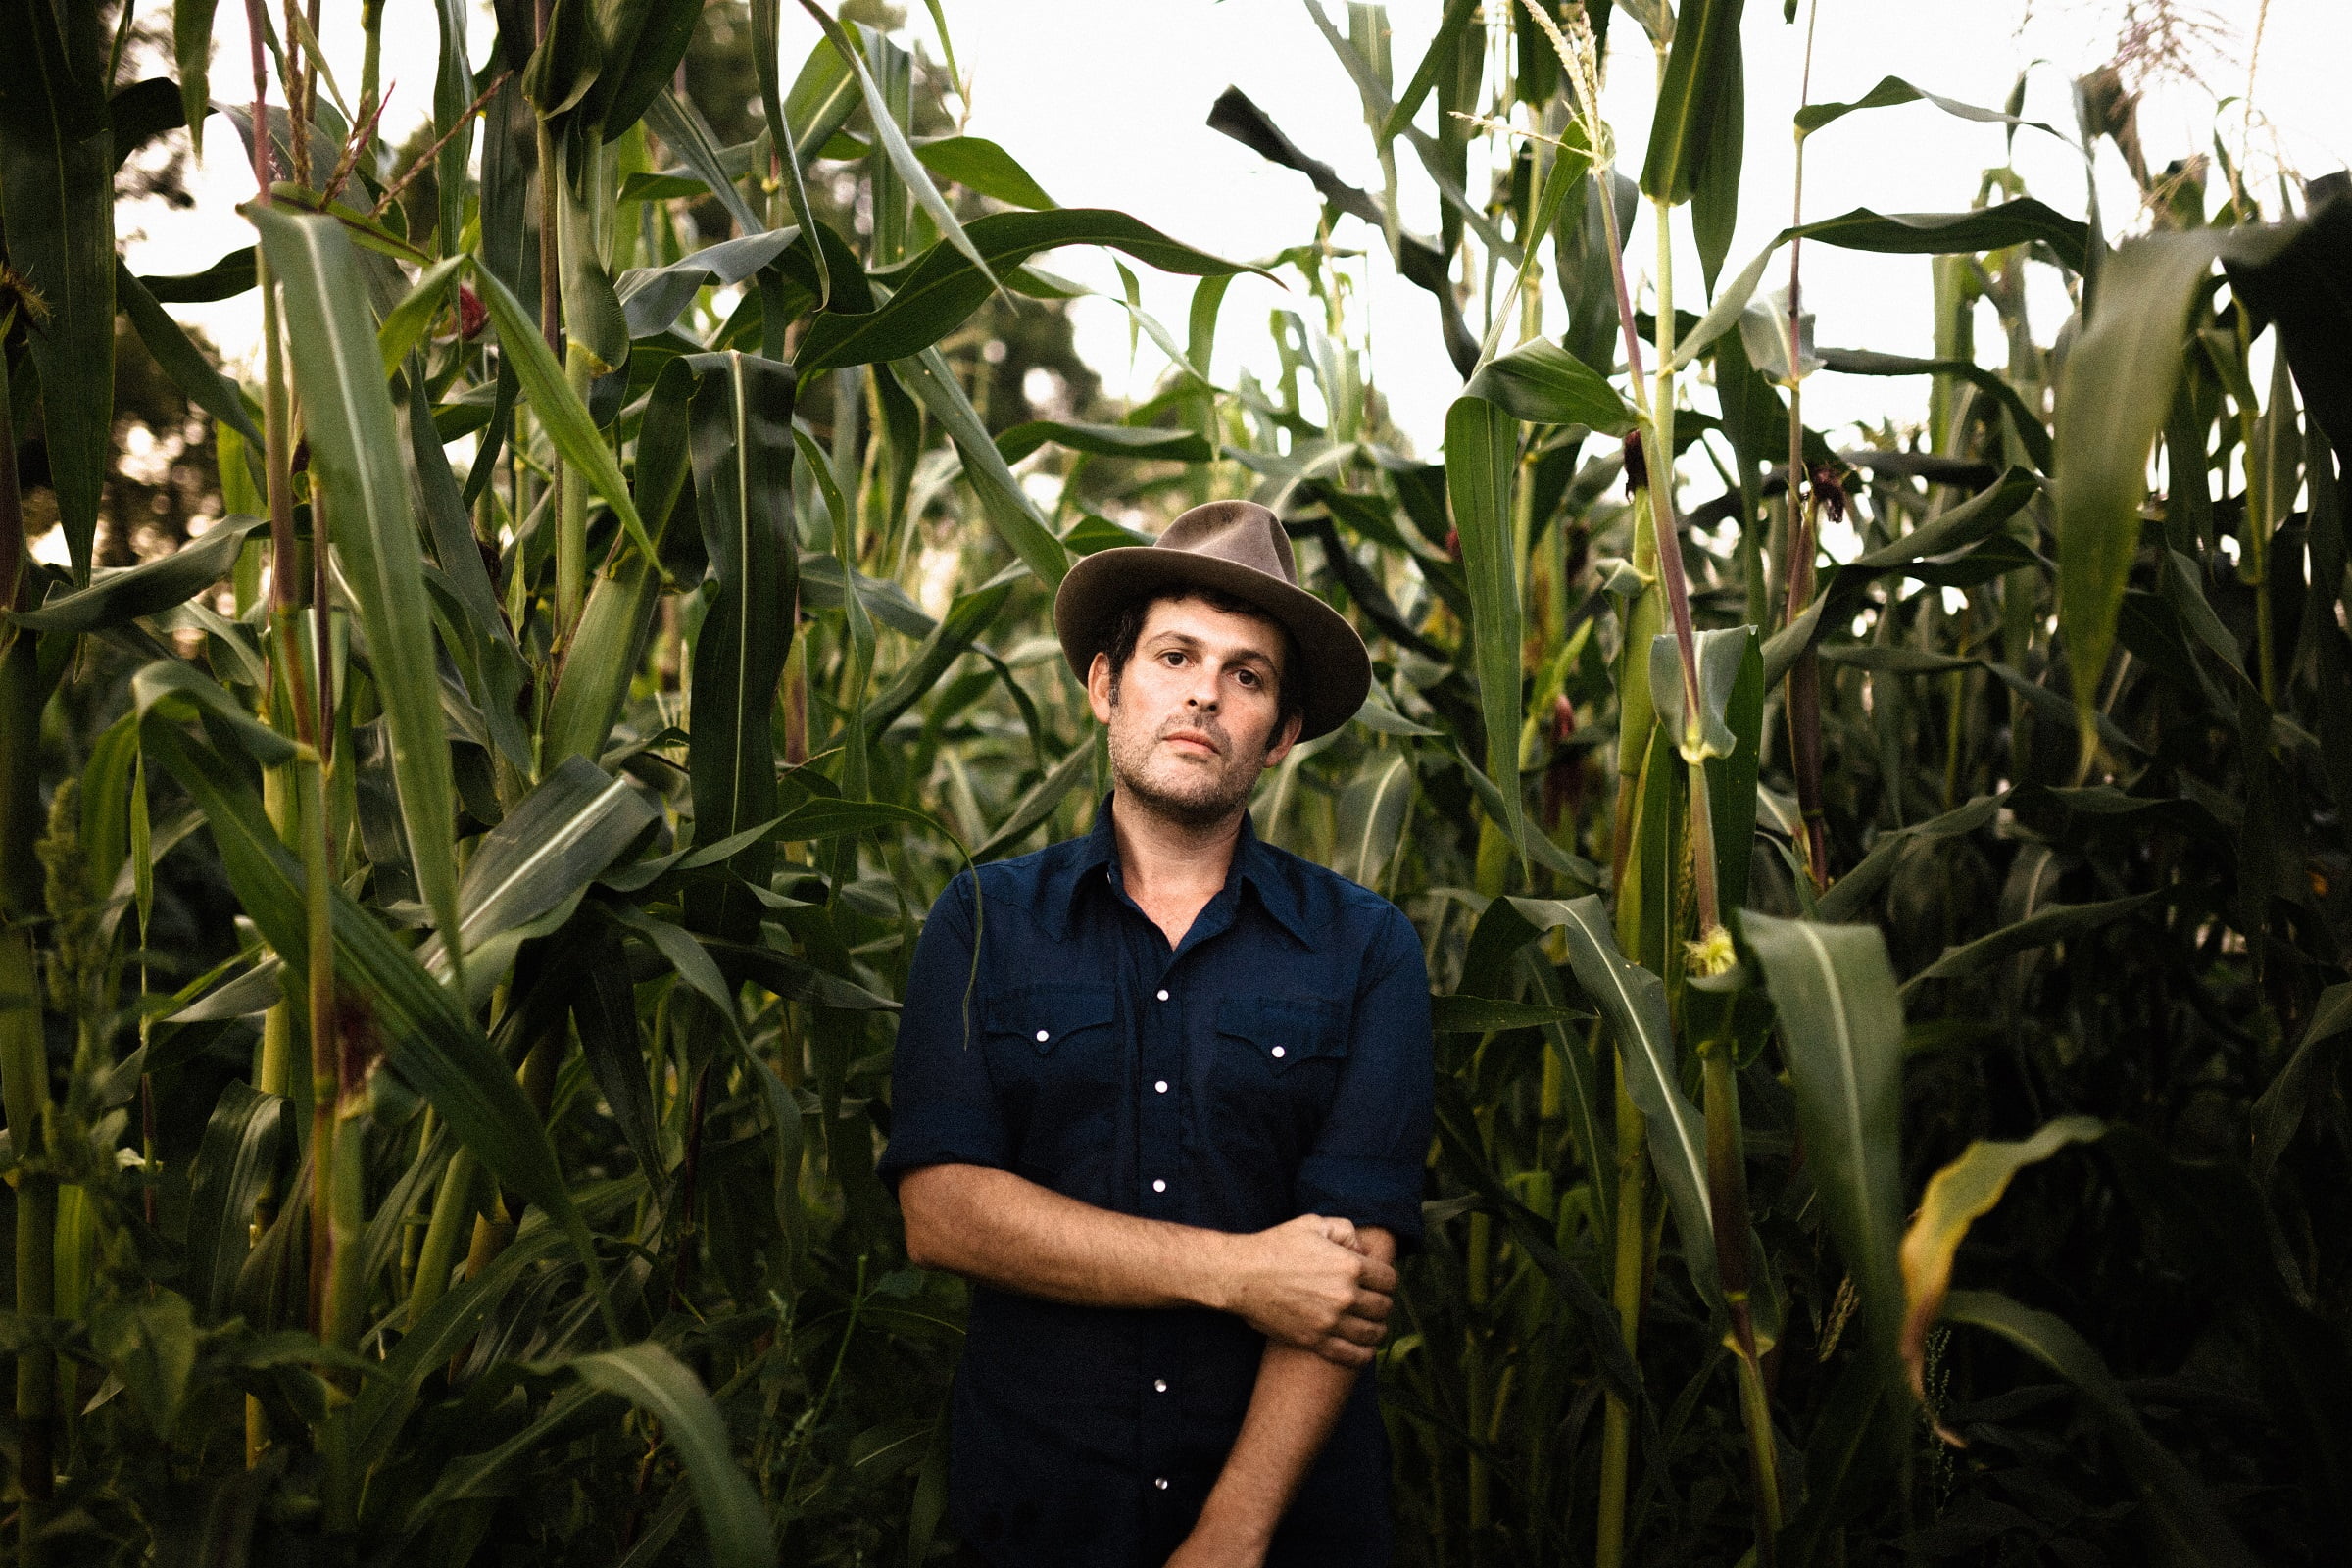 An Otherworldly Landscape: A Conversation with Gregory Alan Isakov